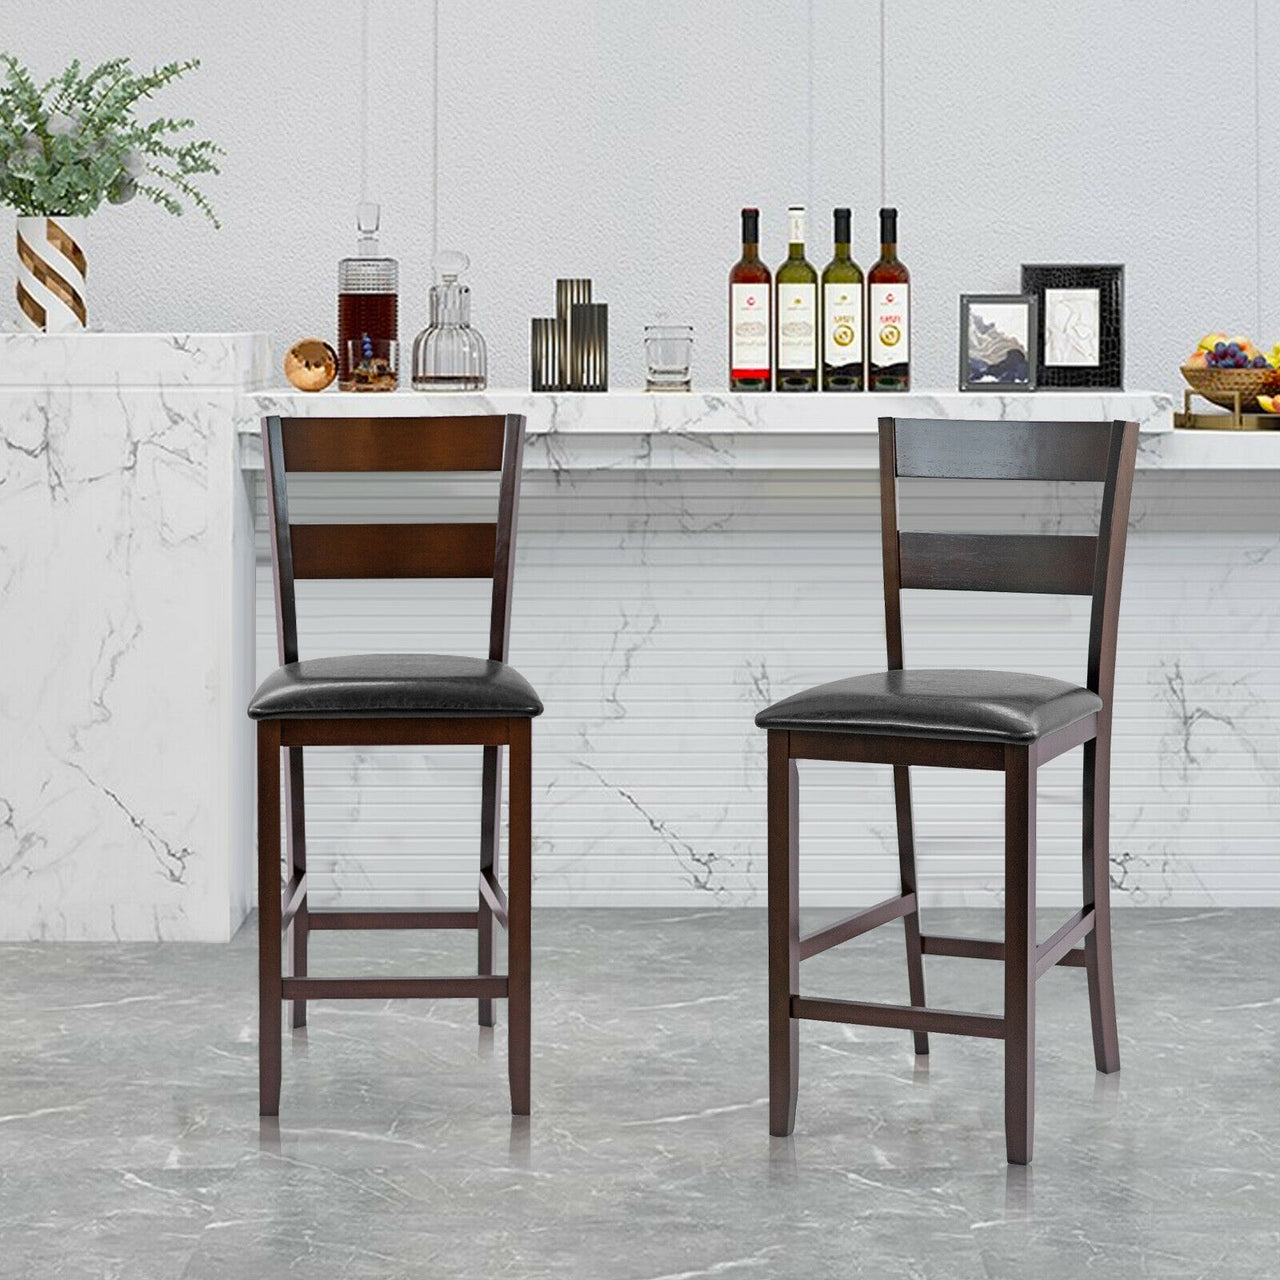 2-Pieces Upholstered Bar Stools Counter Height Chairs with PU Leather Cover - Gallery View 6 of 9